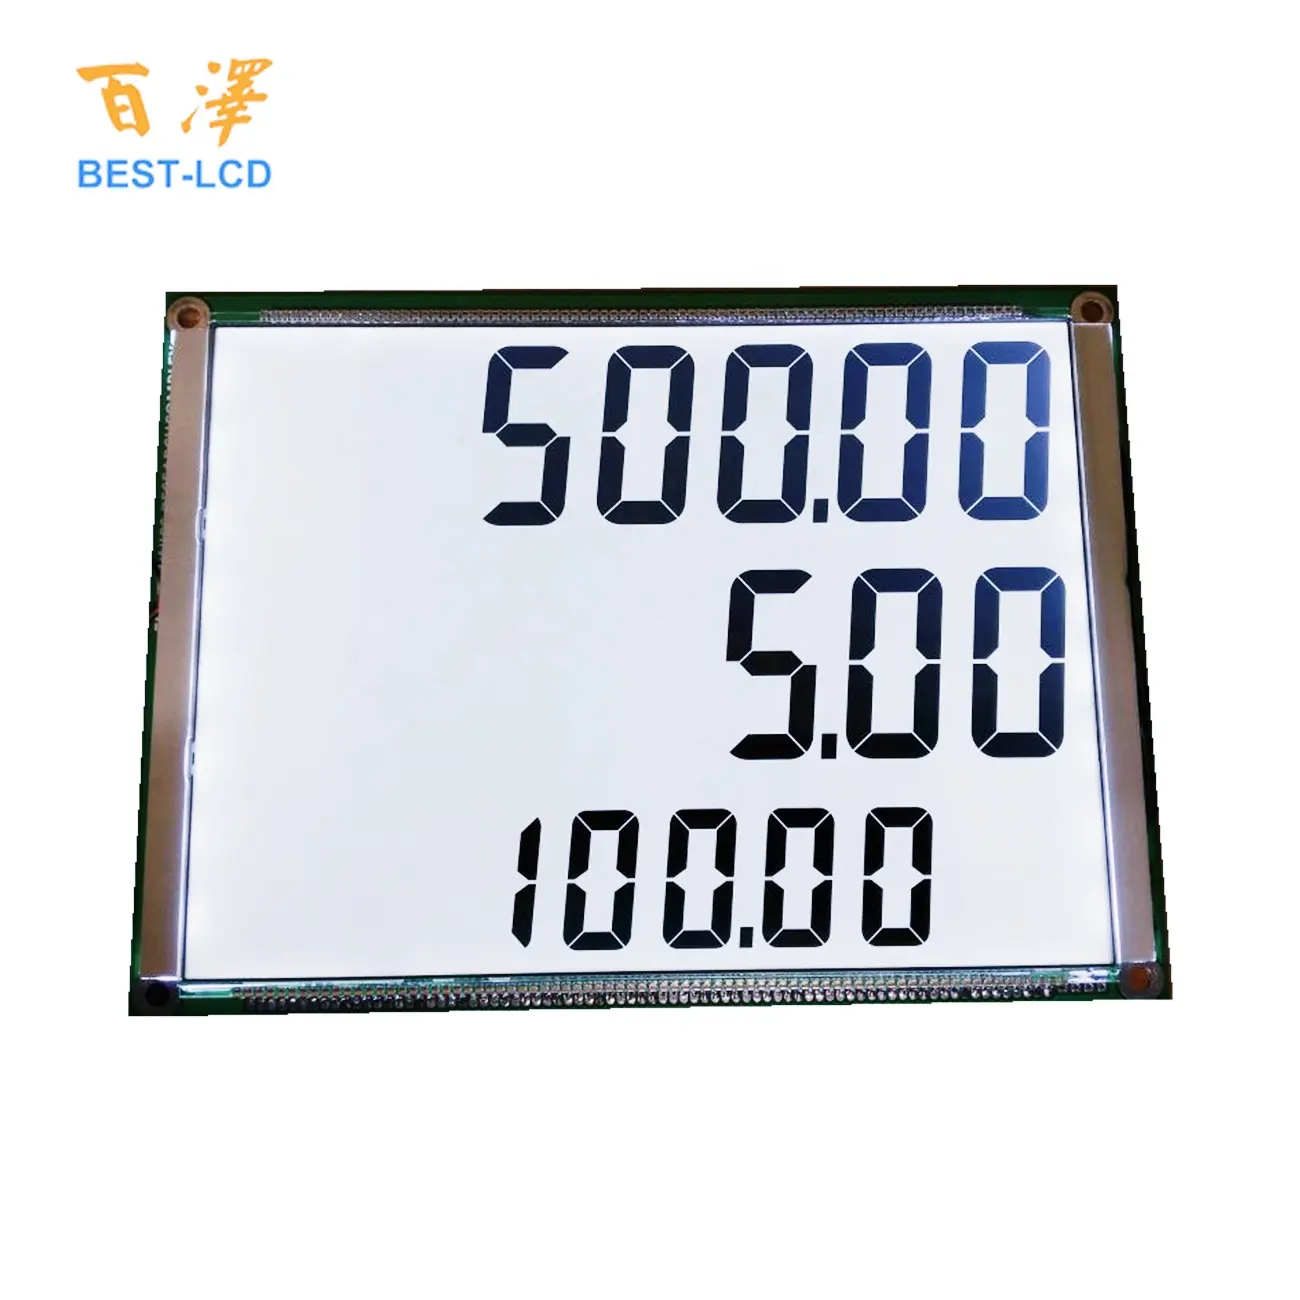 Customized 7 Segment Display 776 LCD Customized Size Monochrome 3 Rows Of 7 Segments 6 Digits LCD Panel Display For Fuel Dispenser/ Petrol Pump/Oil Machine